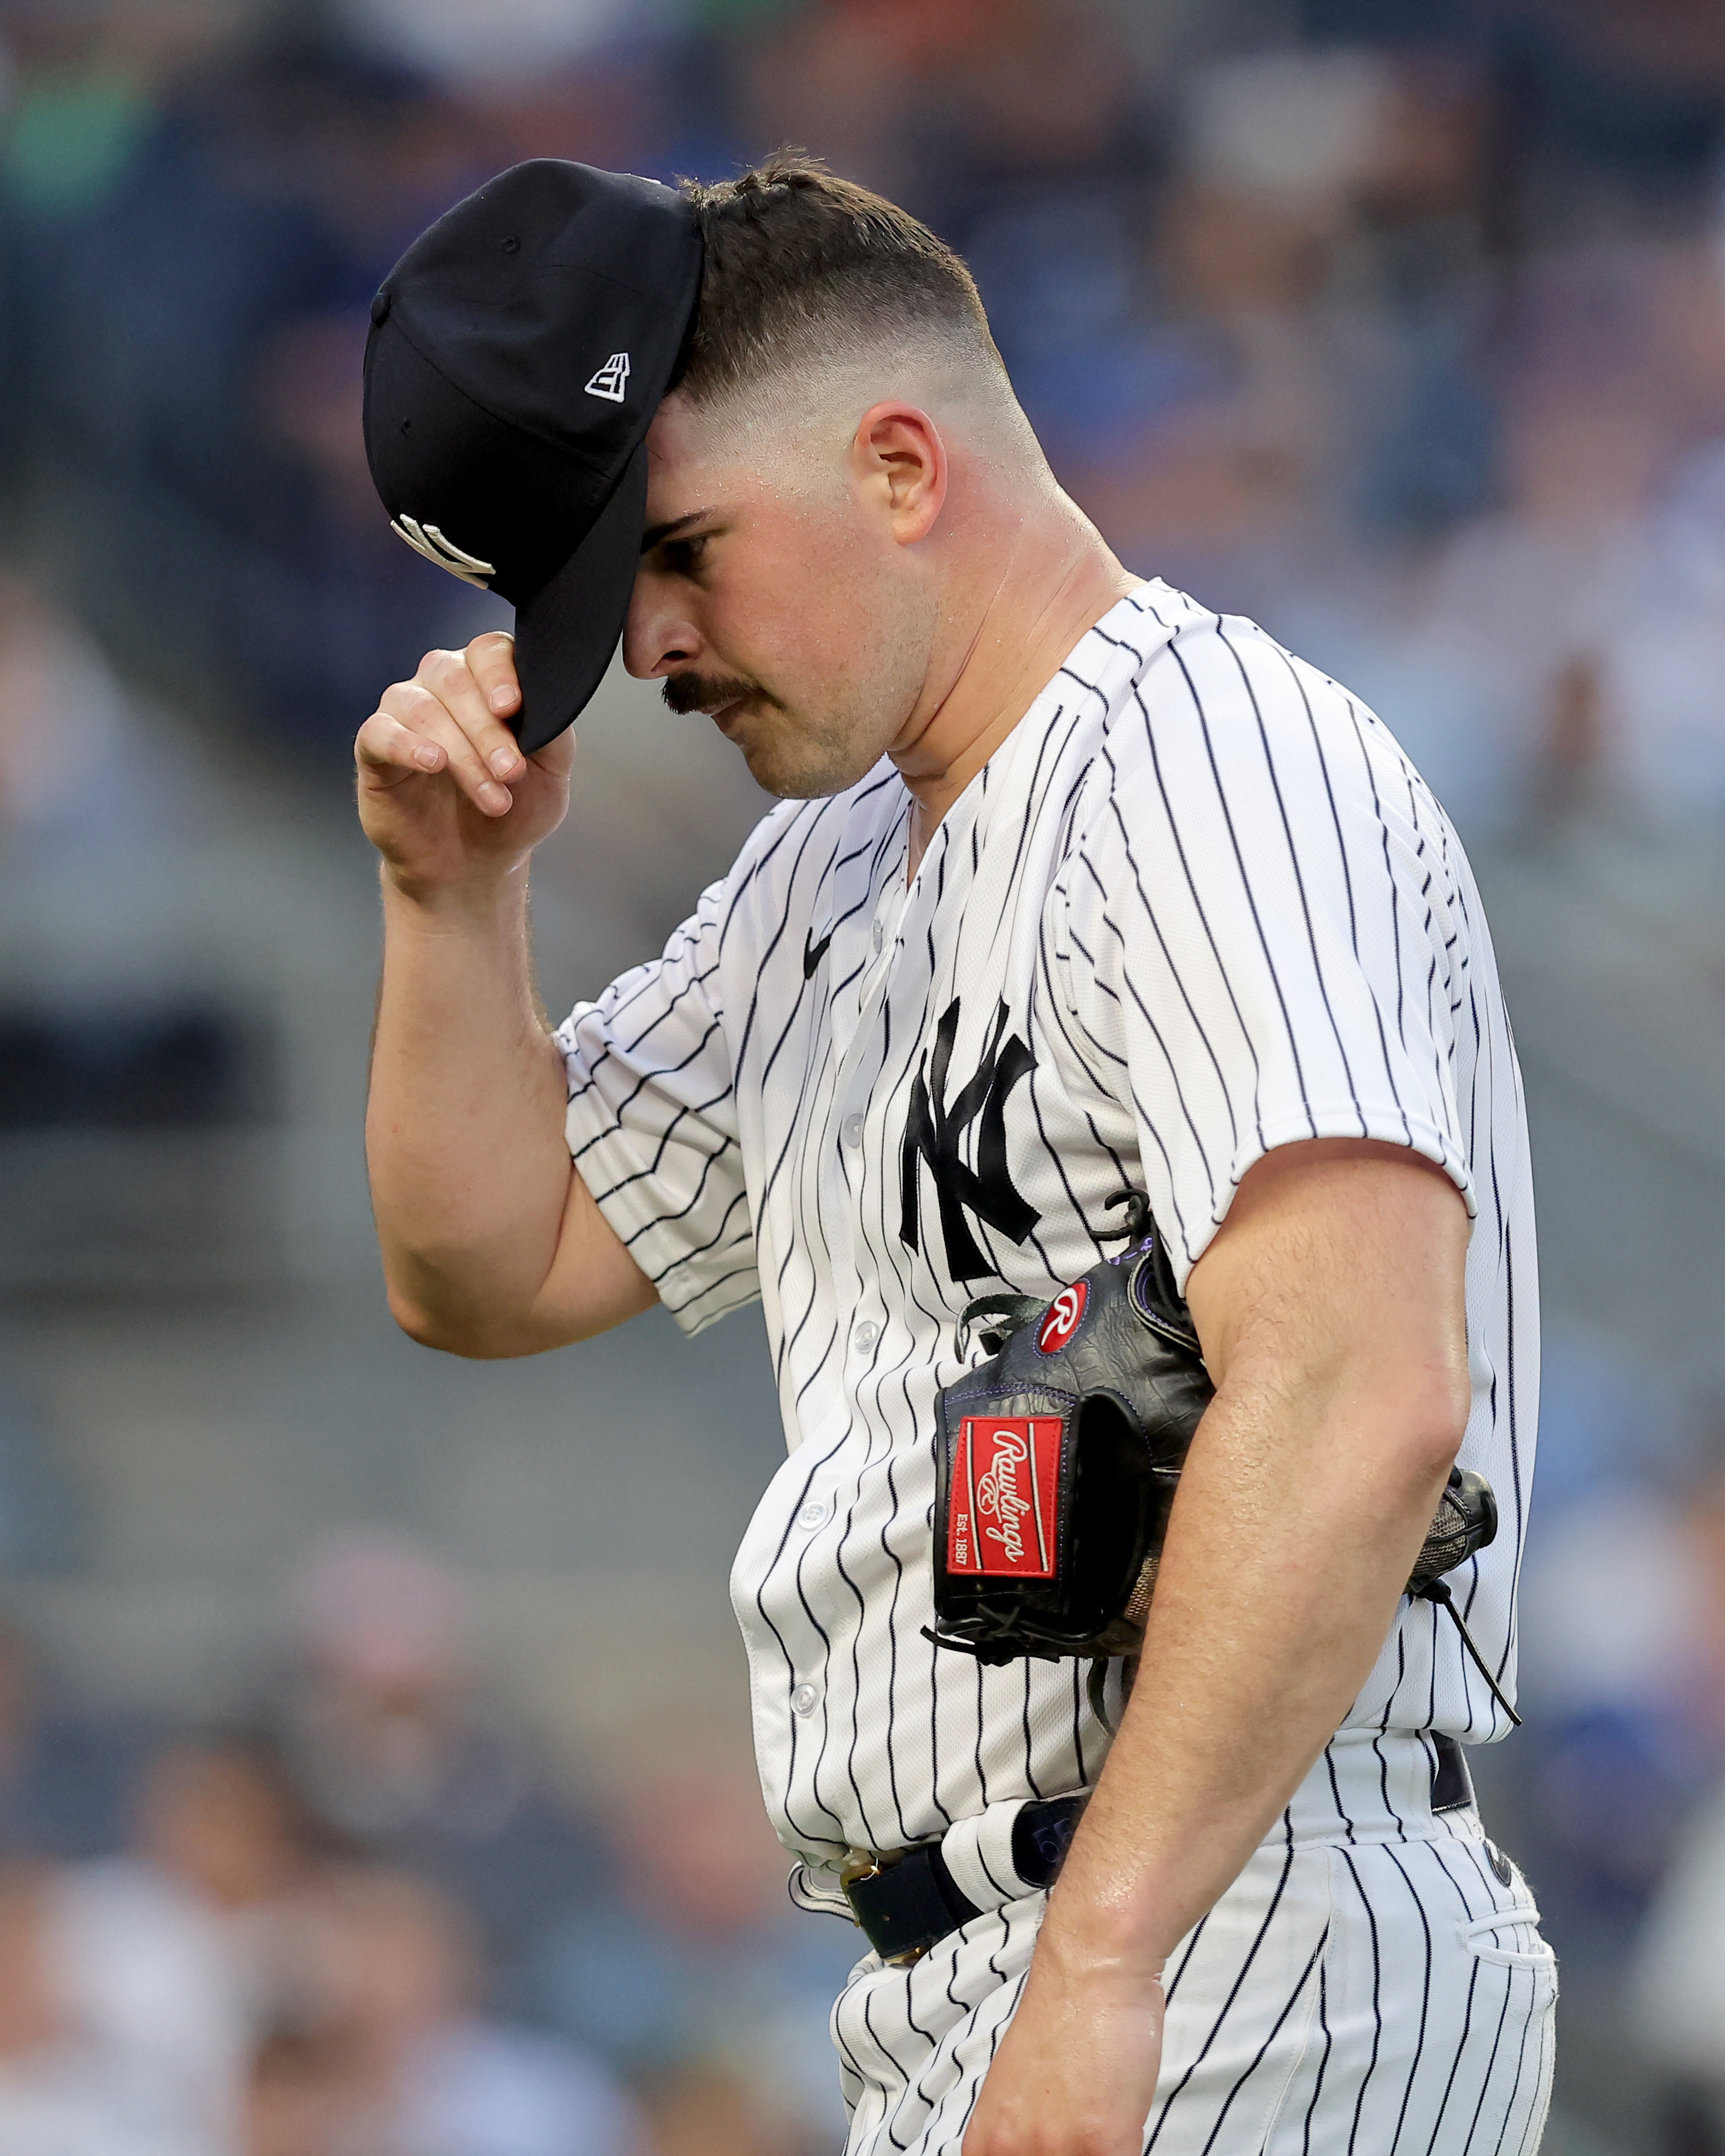 Cubs get 1st win in Bronx as Taillon outpitches Yankees' Rodón in